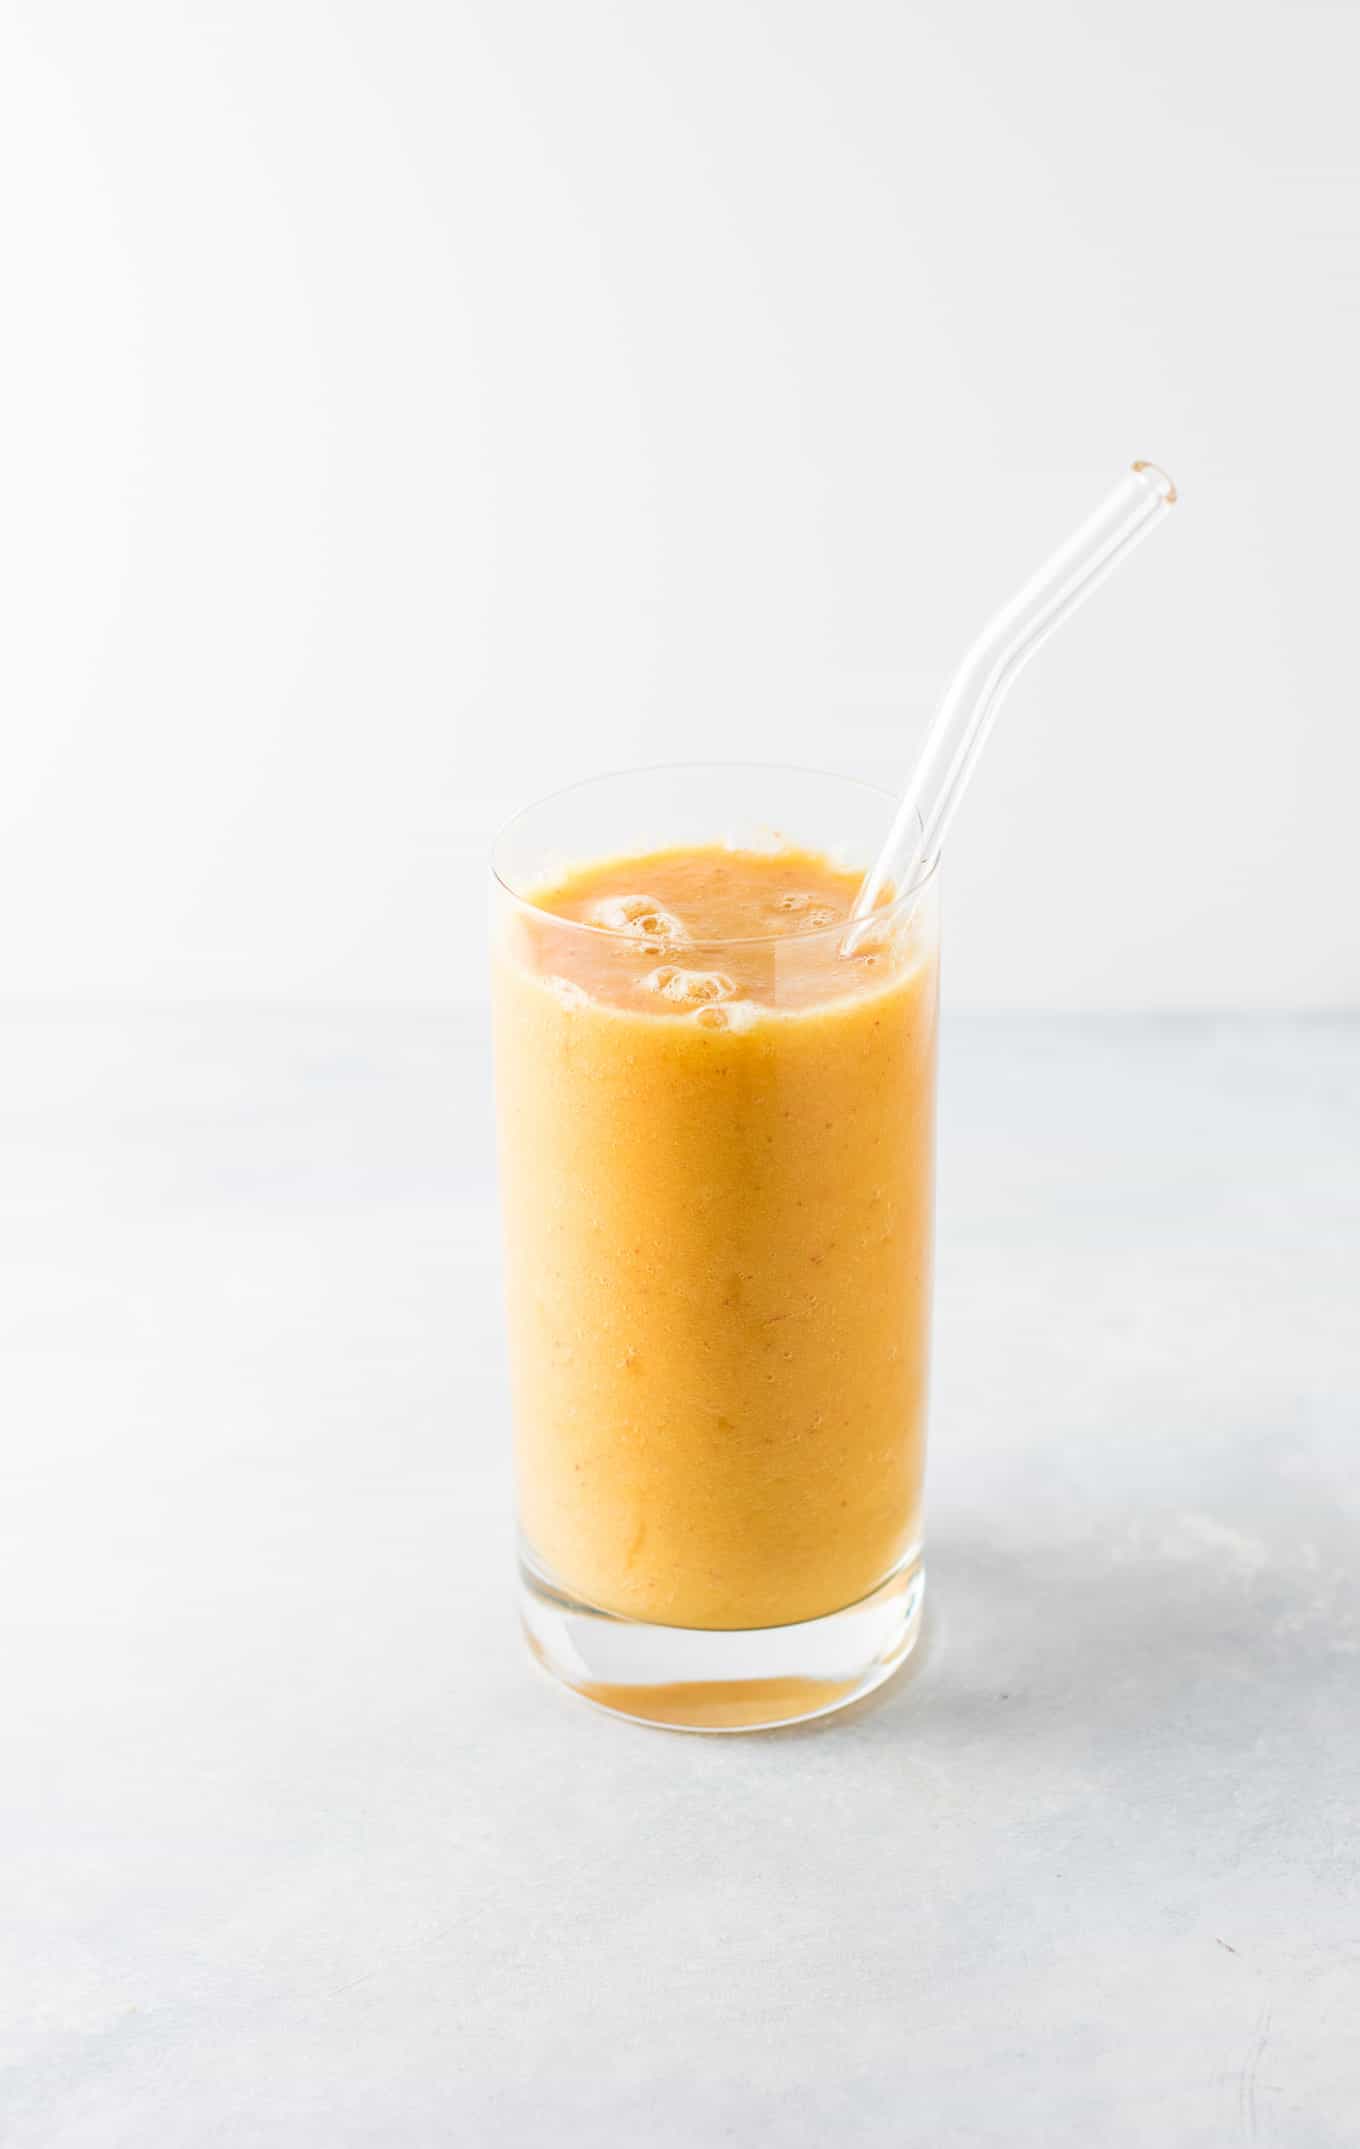 Ginger peach detox smoothie recipe with fresh cucumber and lemon. Packed full of healthy ingredients, naturally vegan, and so refreshing! #healthysmoothie #detoxsmoothie #gingerpeachsmoothie #vegan #smoothierecipes